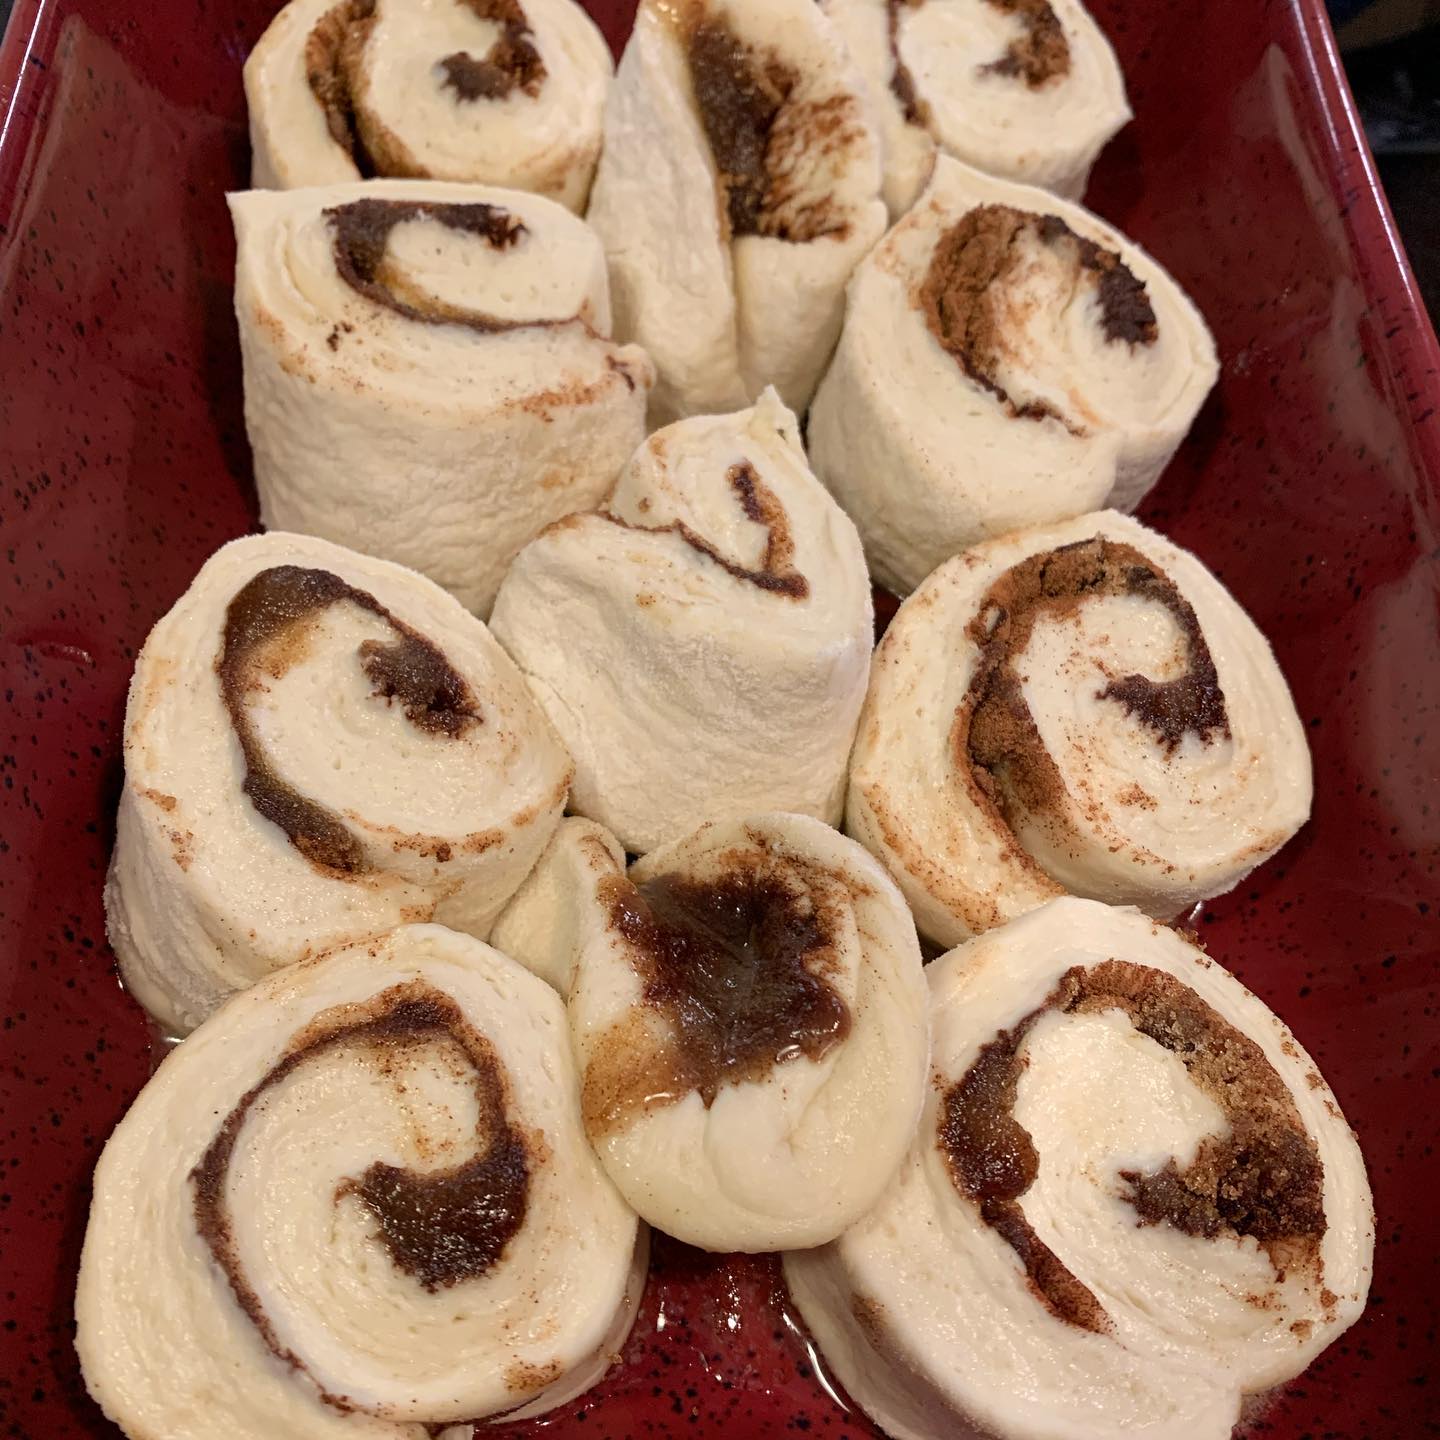 Cinnamon buns! The best way to use up leftover pizza dough. Also the best reason to make extra pizza dough. #smellsgreat #iwishyoucouldsmellthis